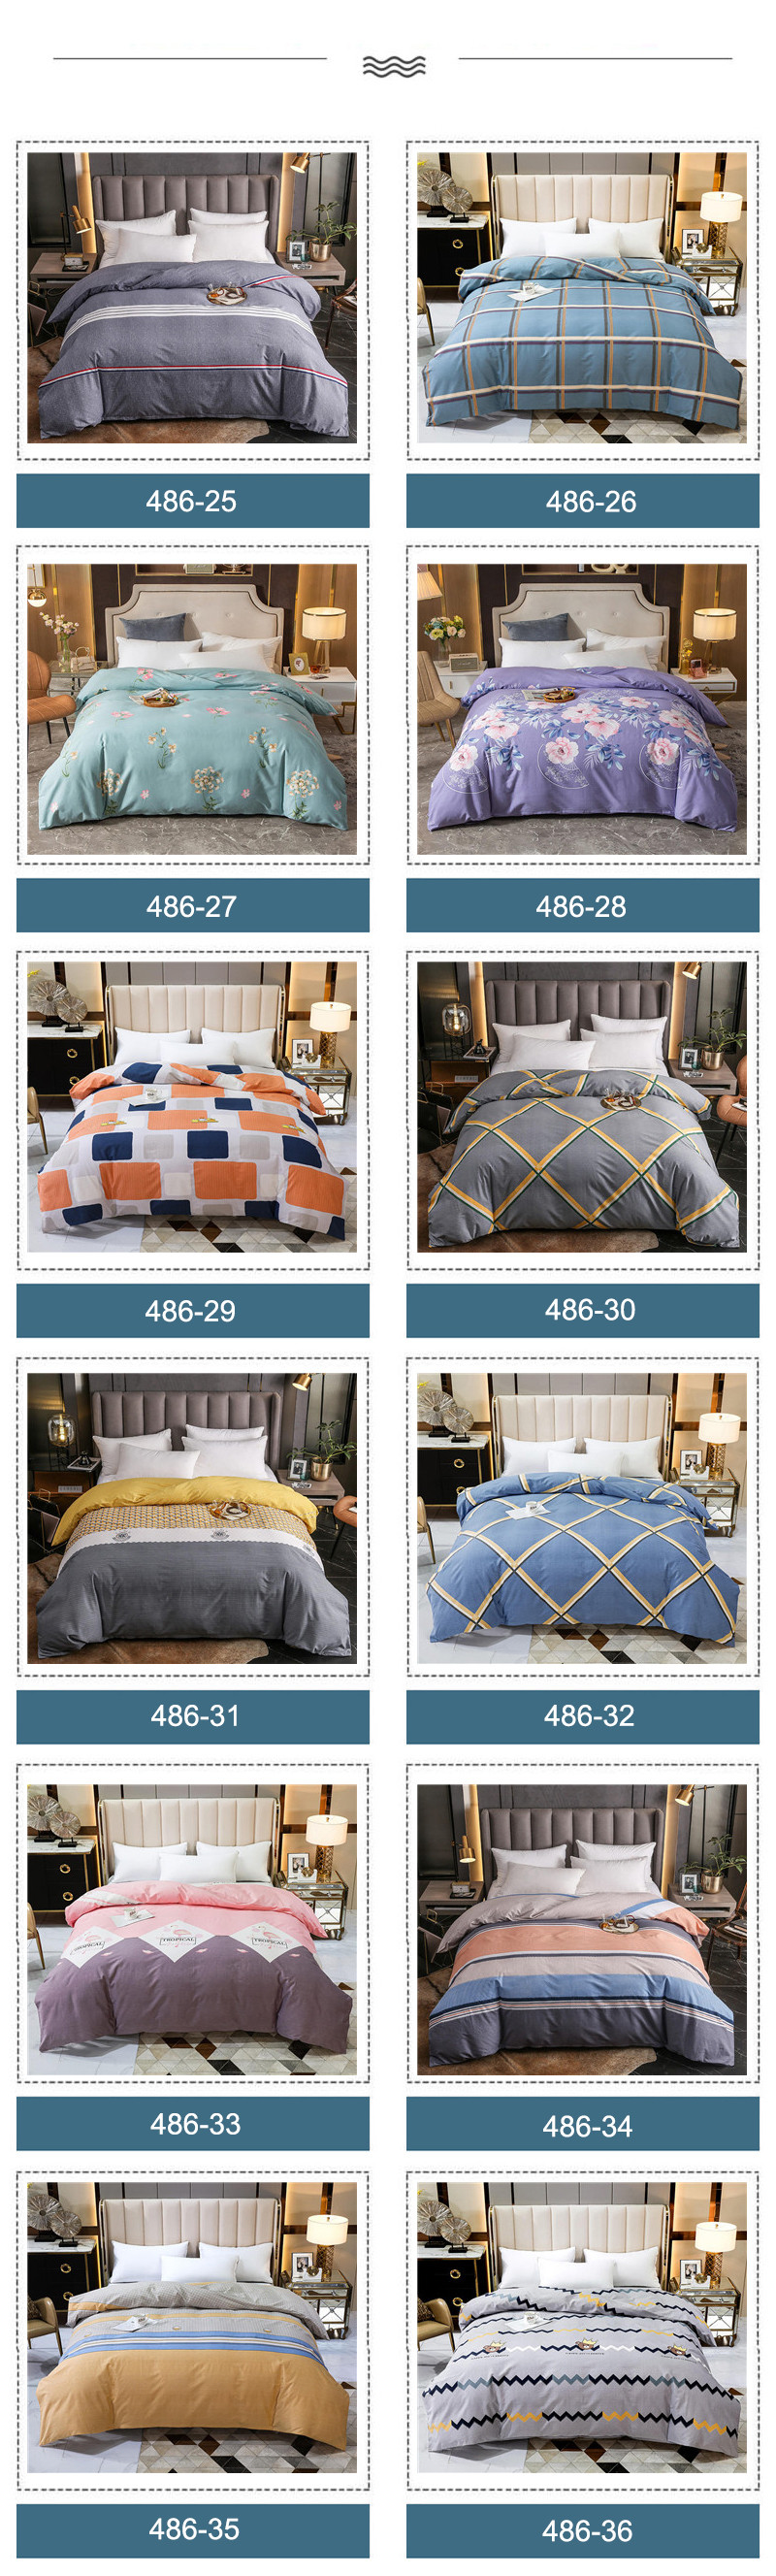 For Factory Bedding Super Cheap